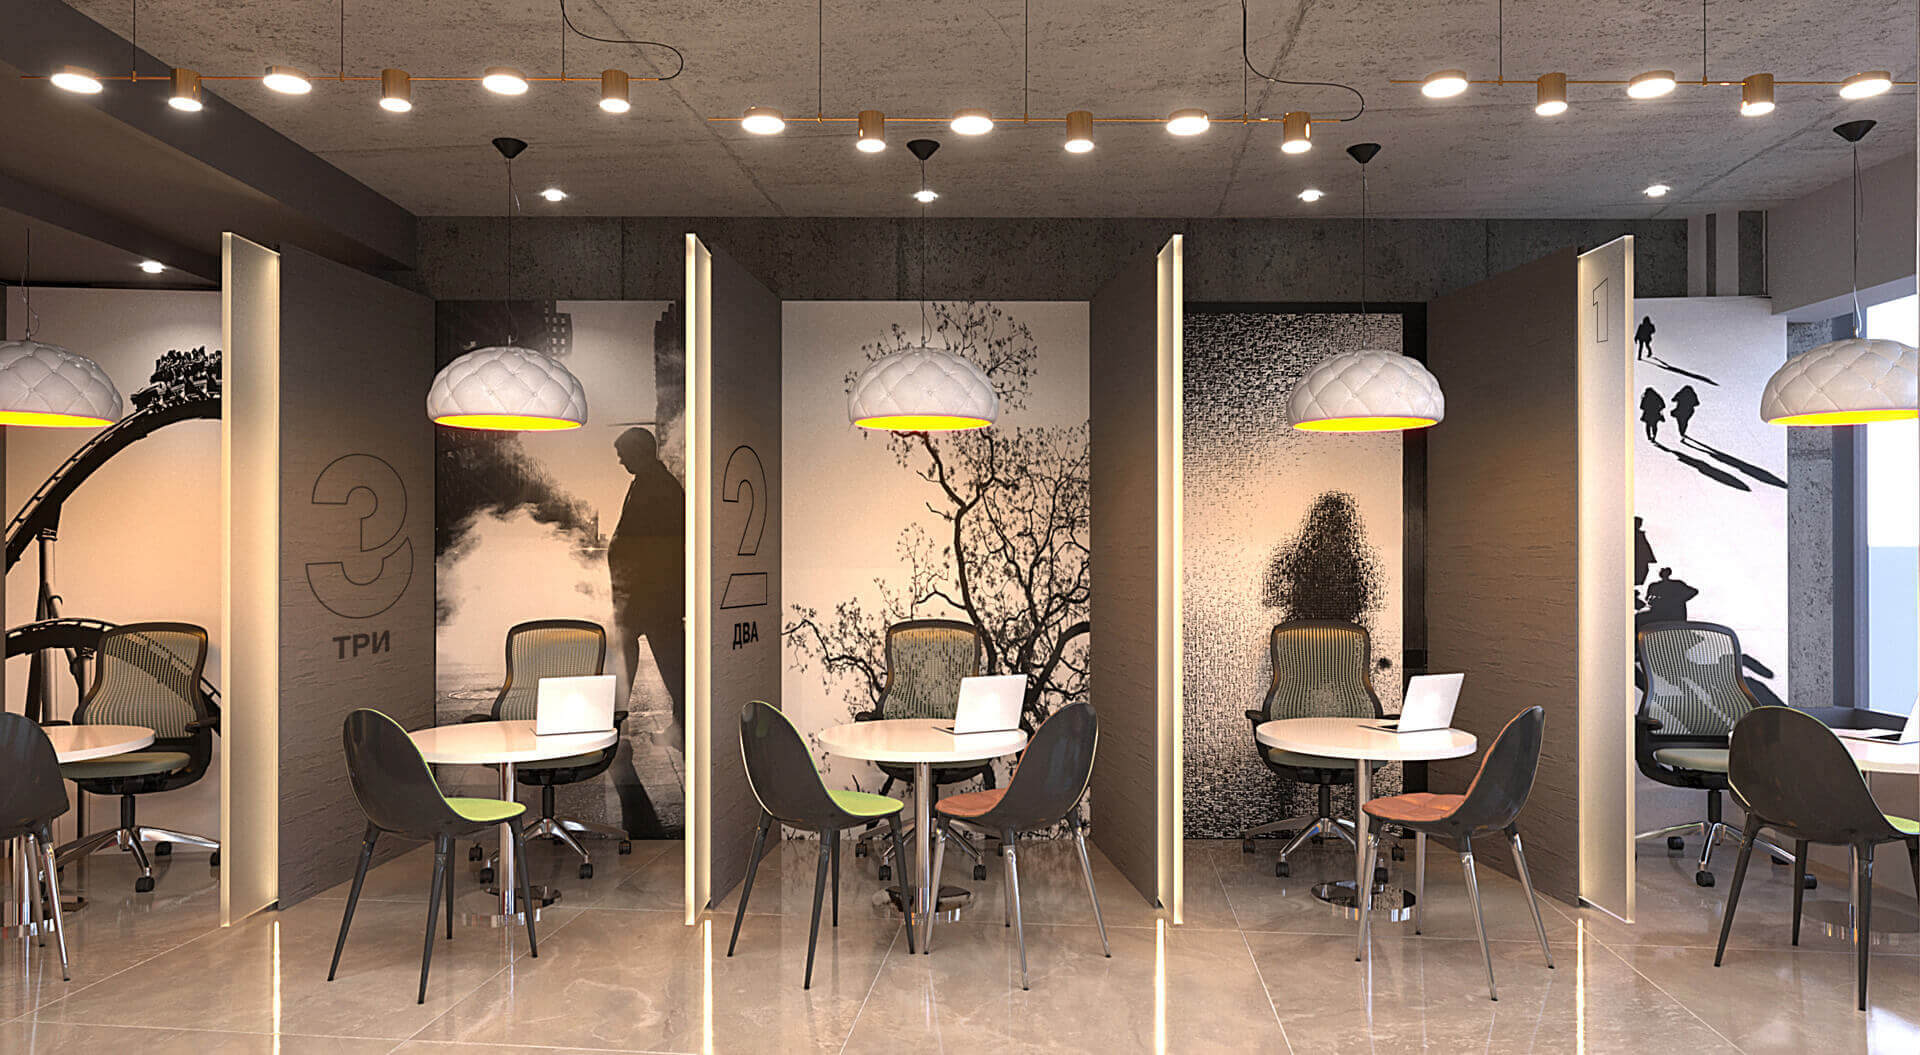 Zenit Bank Russia, Retail Interior Design, Customer Interview Zone and Graphic Communication - CampbellRigg Agency